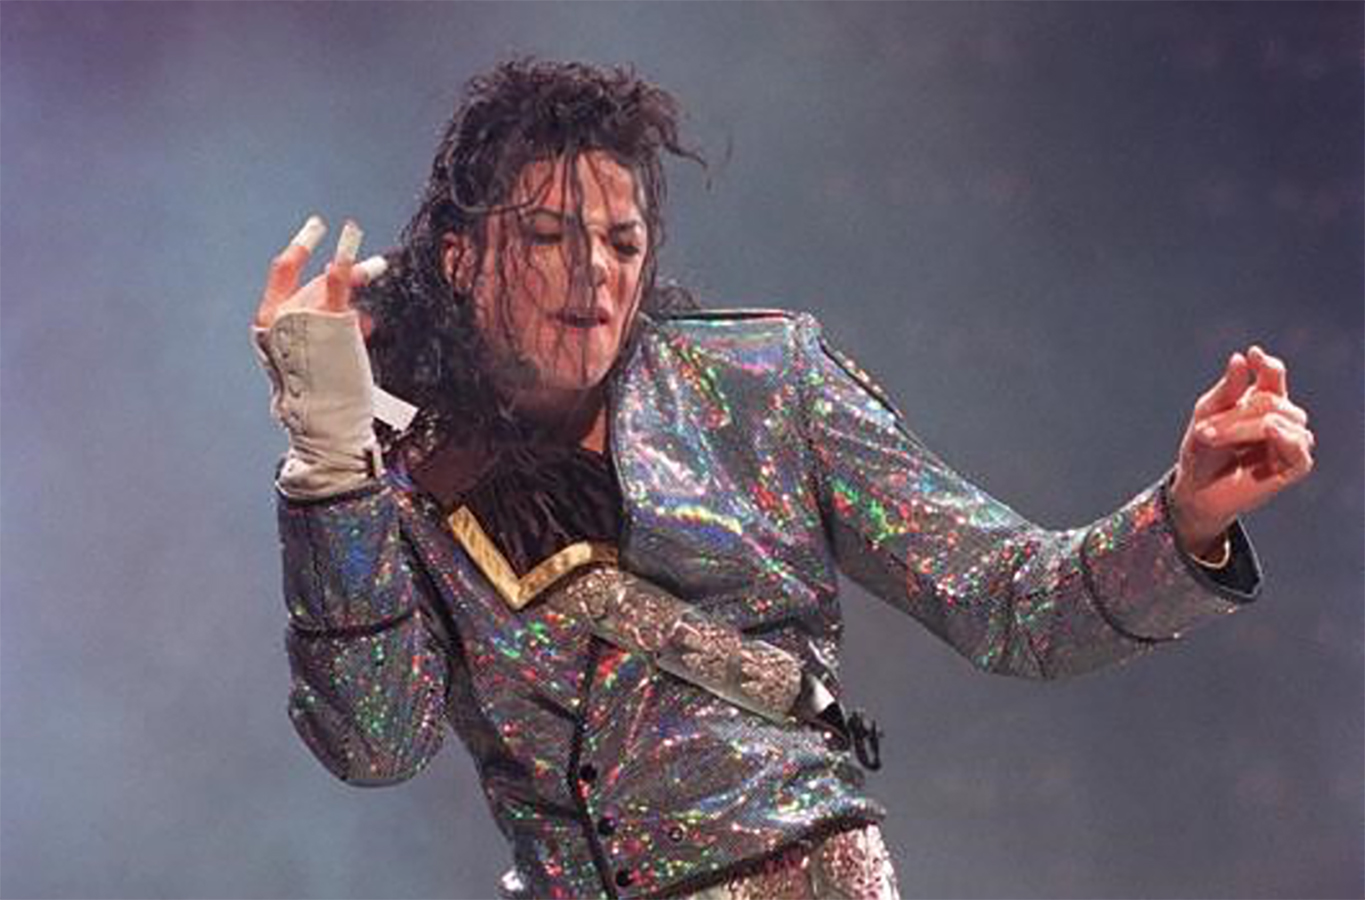 Michael Jackson’s Influence Continues To Guide New Artists